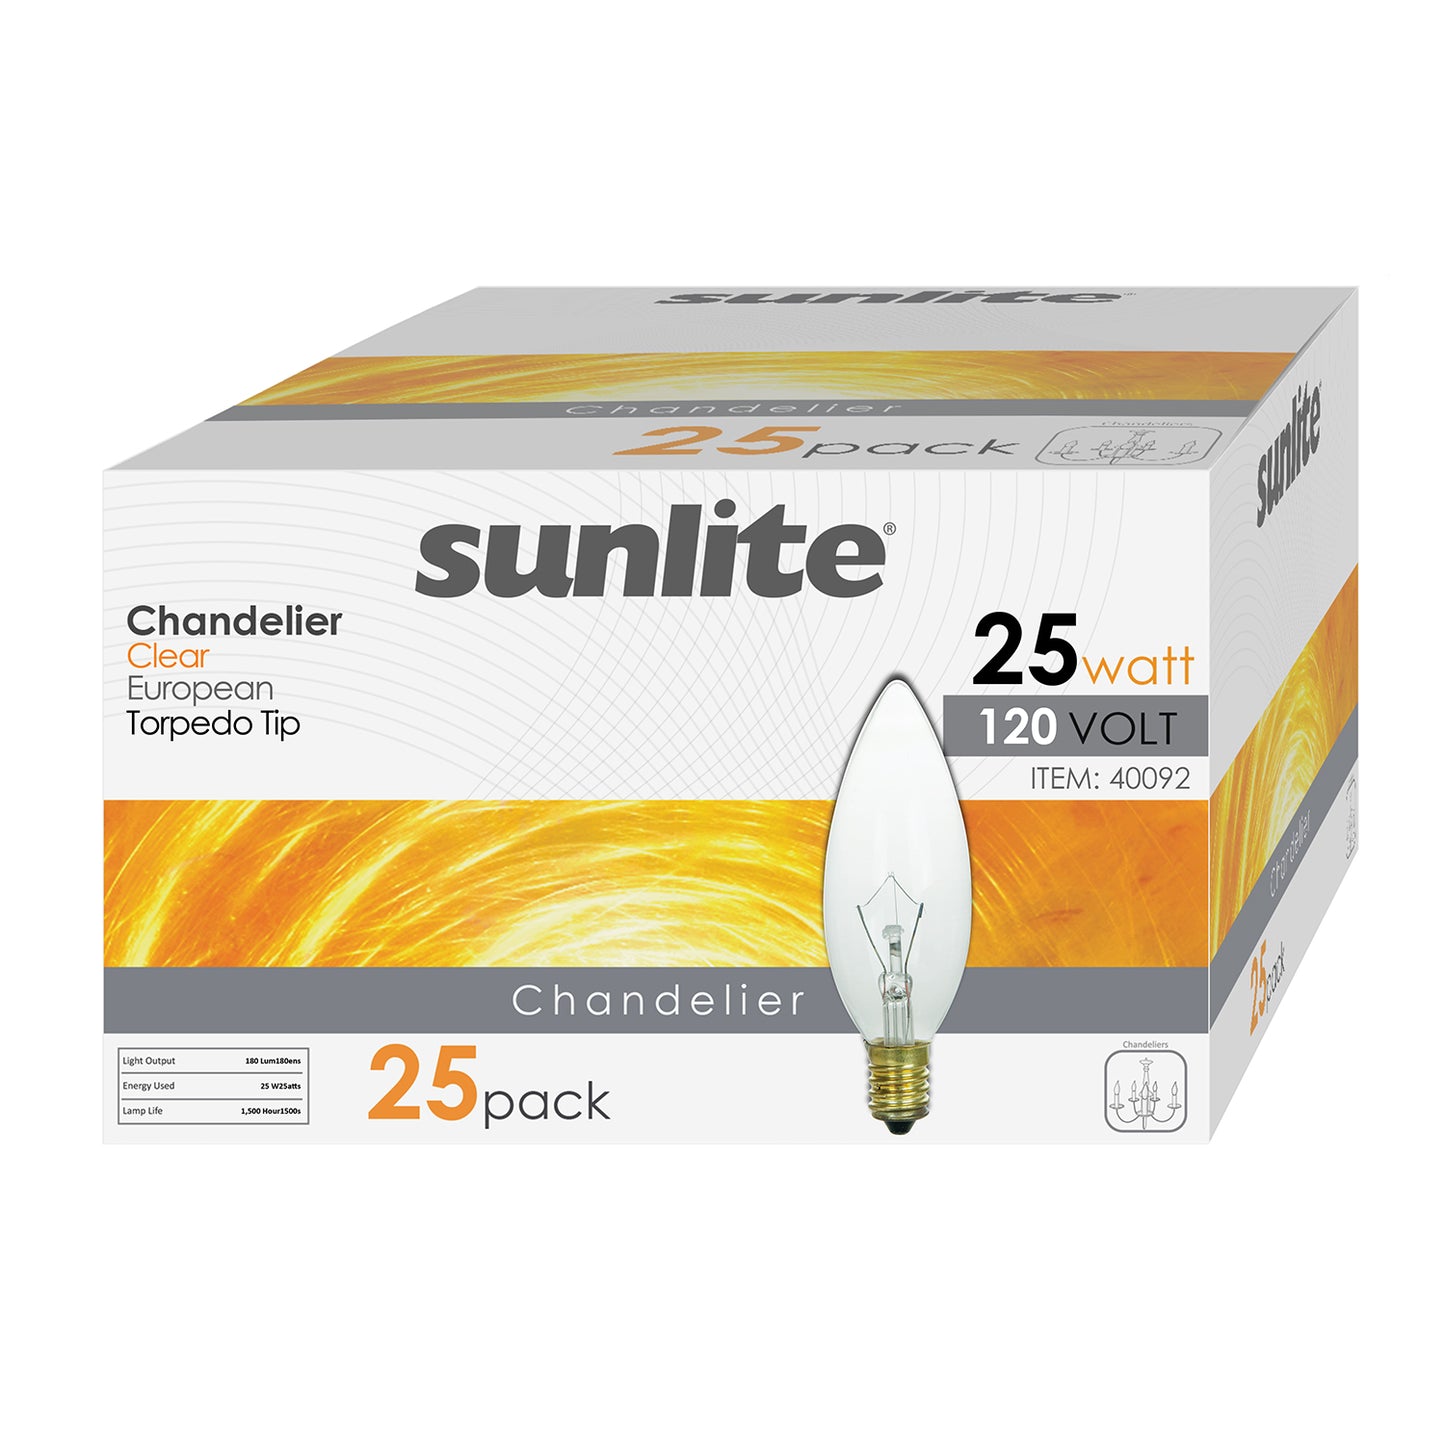 Sunlite 25CTC/32/E14/25PK 25W Incandescent Torpedo Tip Chandelier with Crystal Clear Light Bulb and European E14 Base (25 Pack)